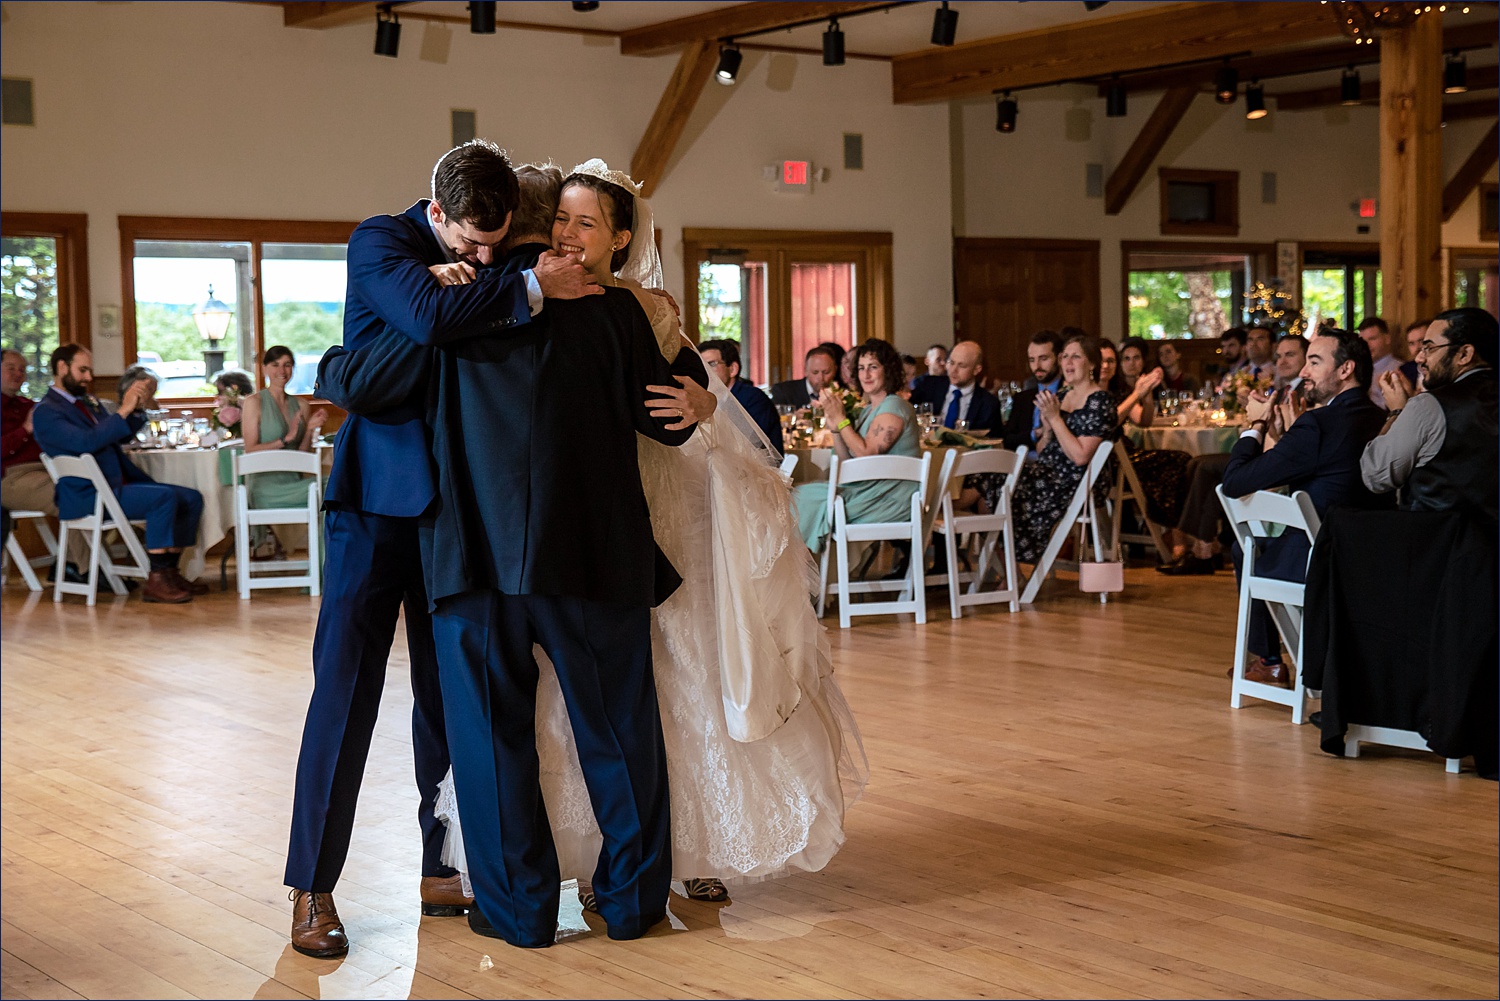 The newlyweds embrace her father on their wedding day in NH